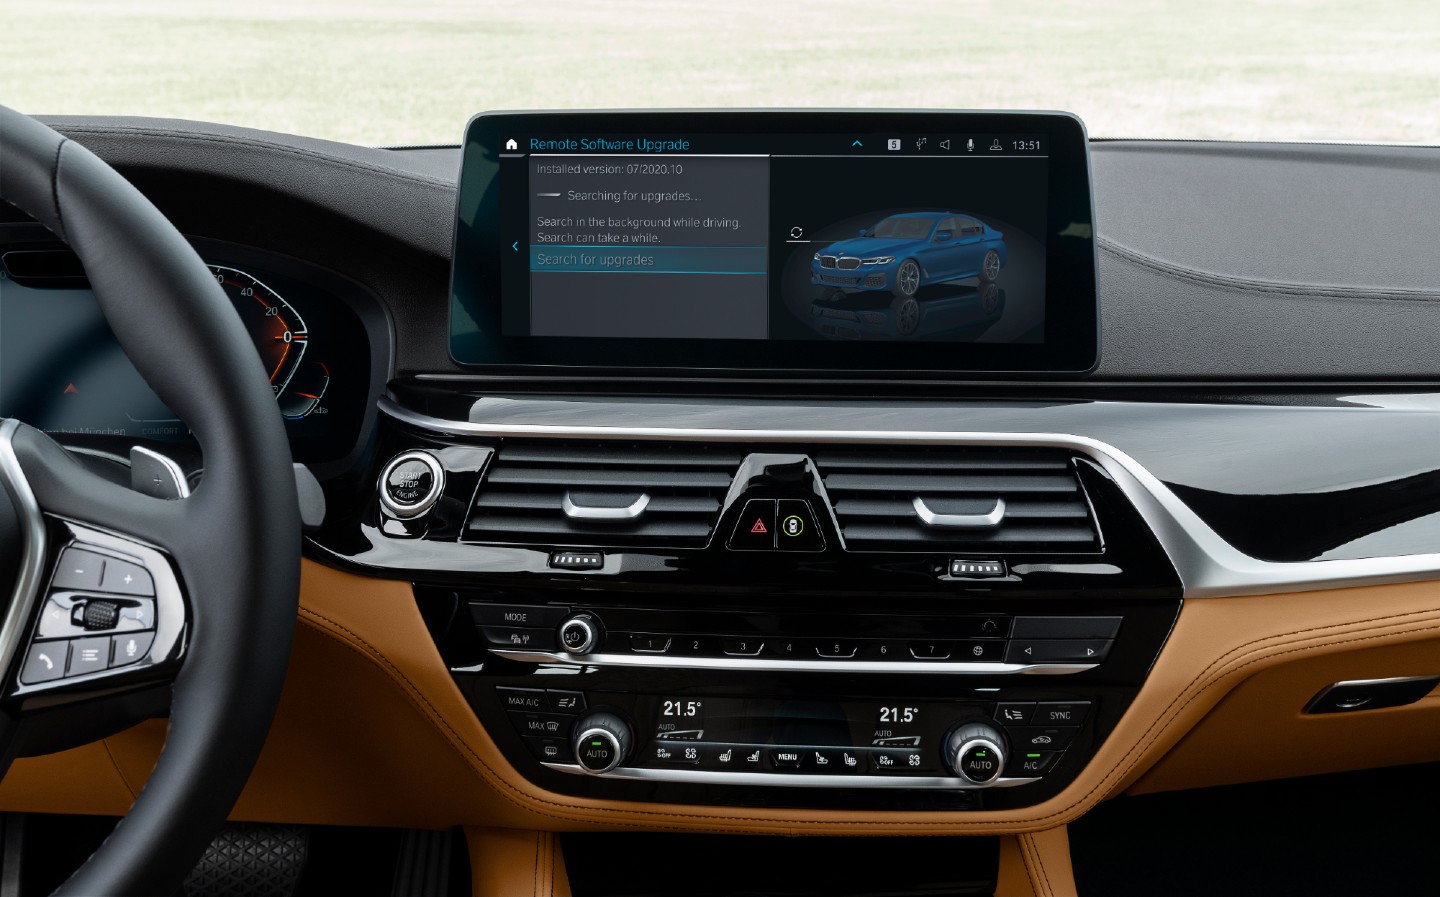 BMW could offer heated seats and cruise control on subscription